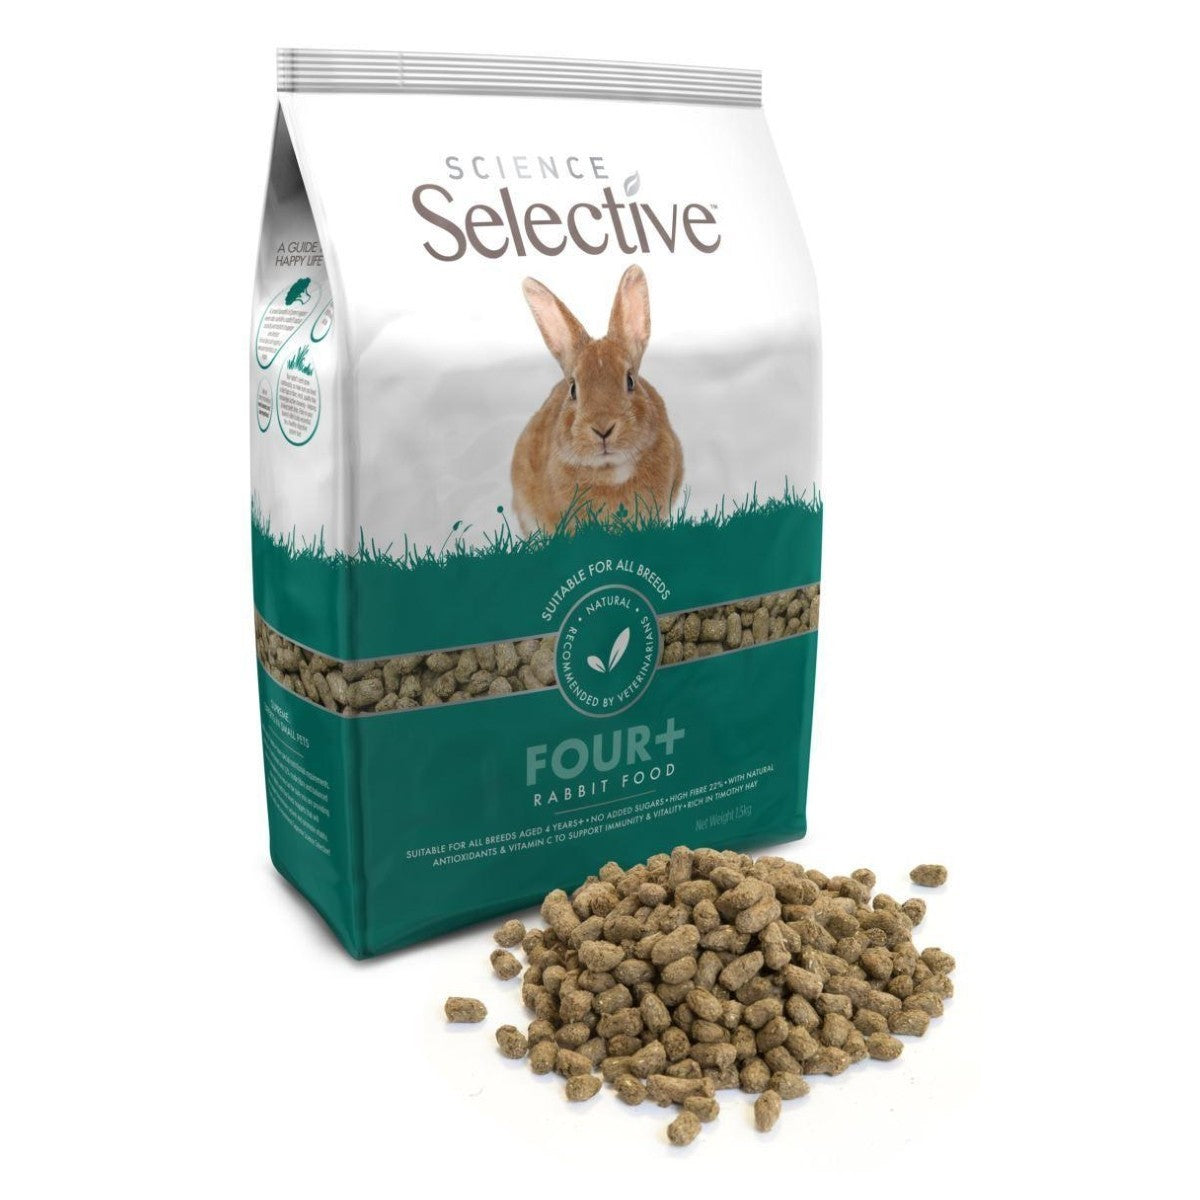 Science Selective - Four+ Rabbit Food